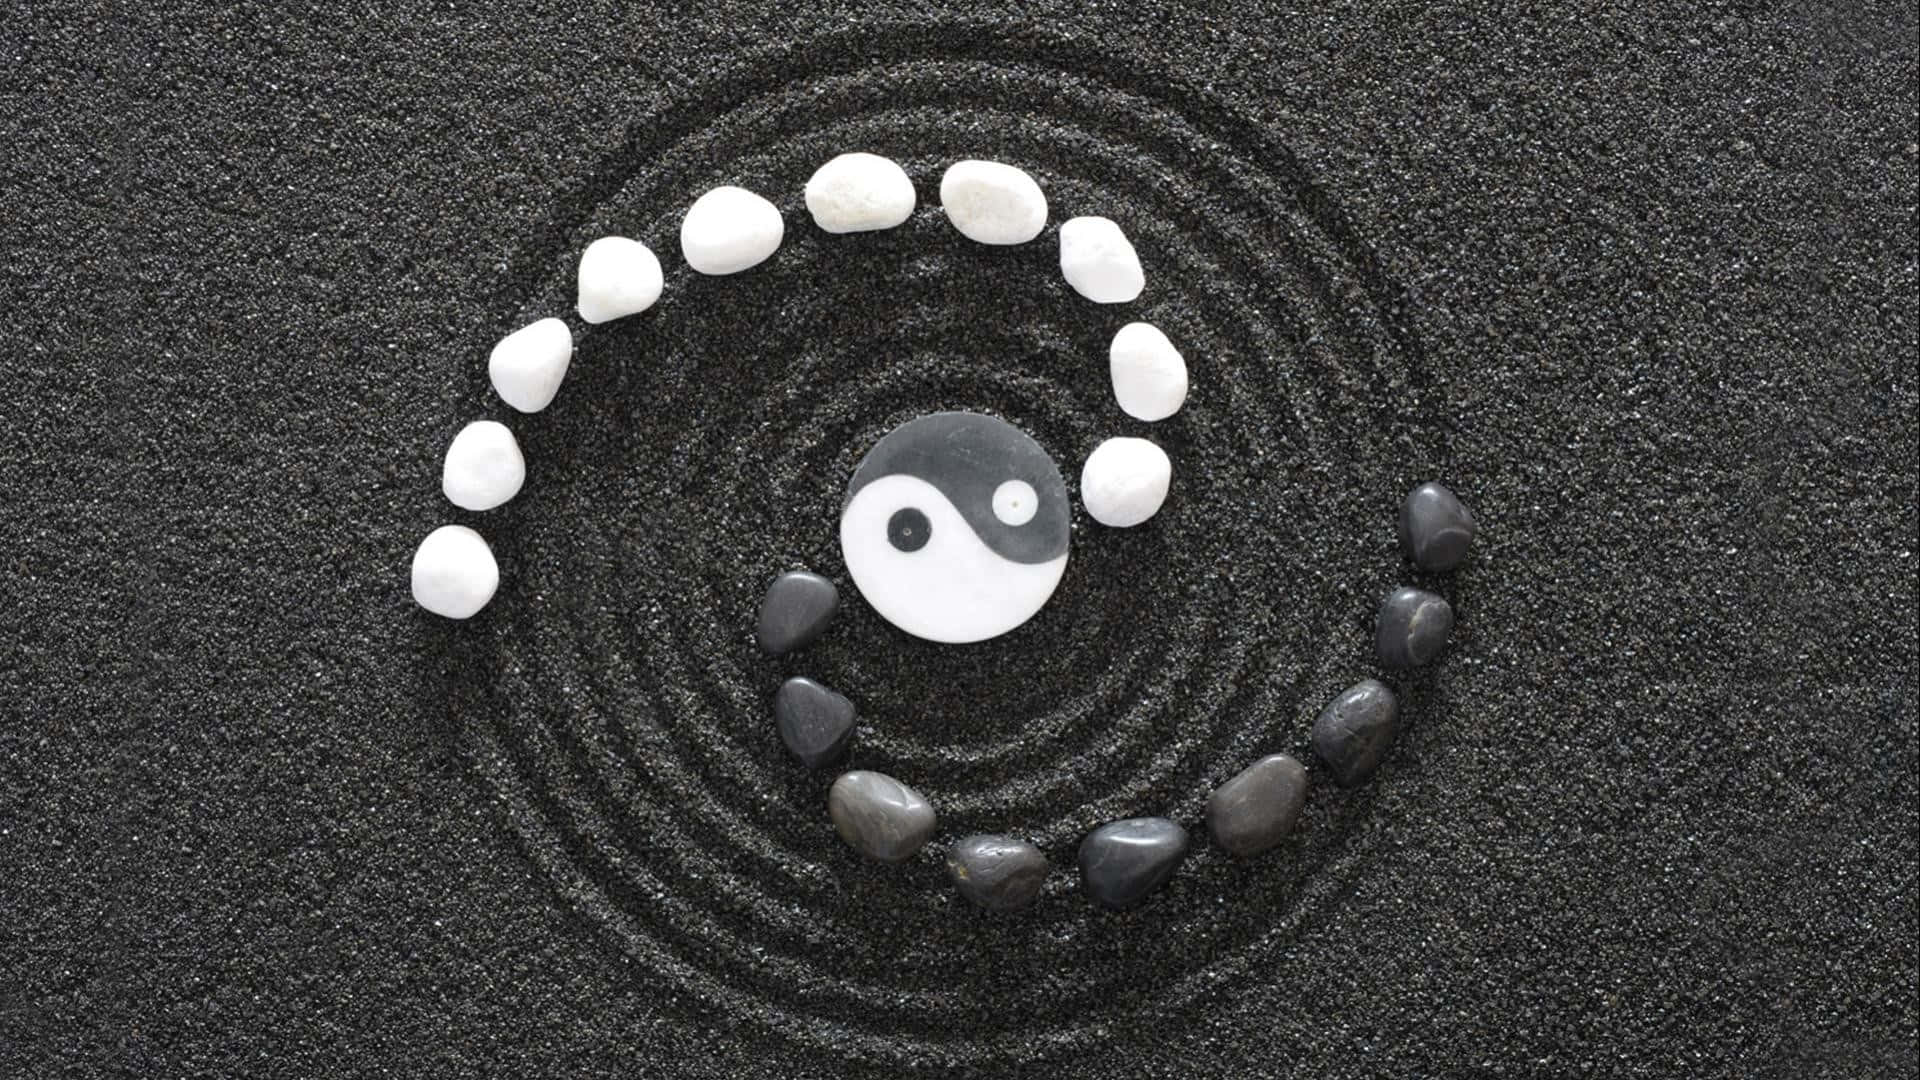 A Yin Yang Symbol With Stones And Pebbles